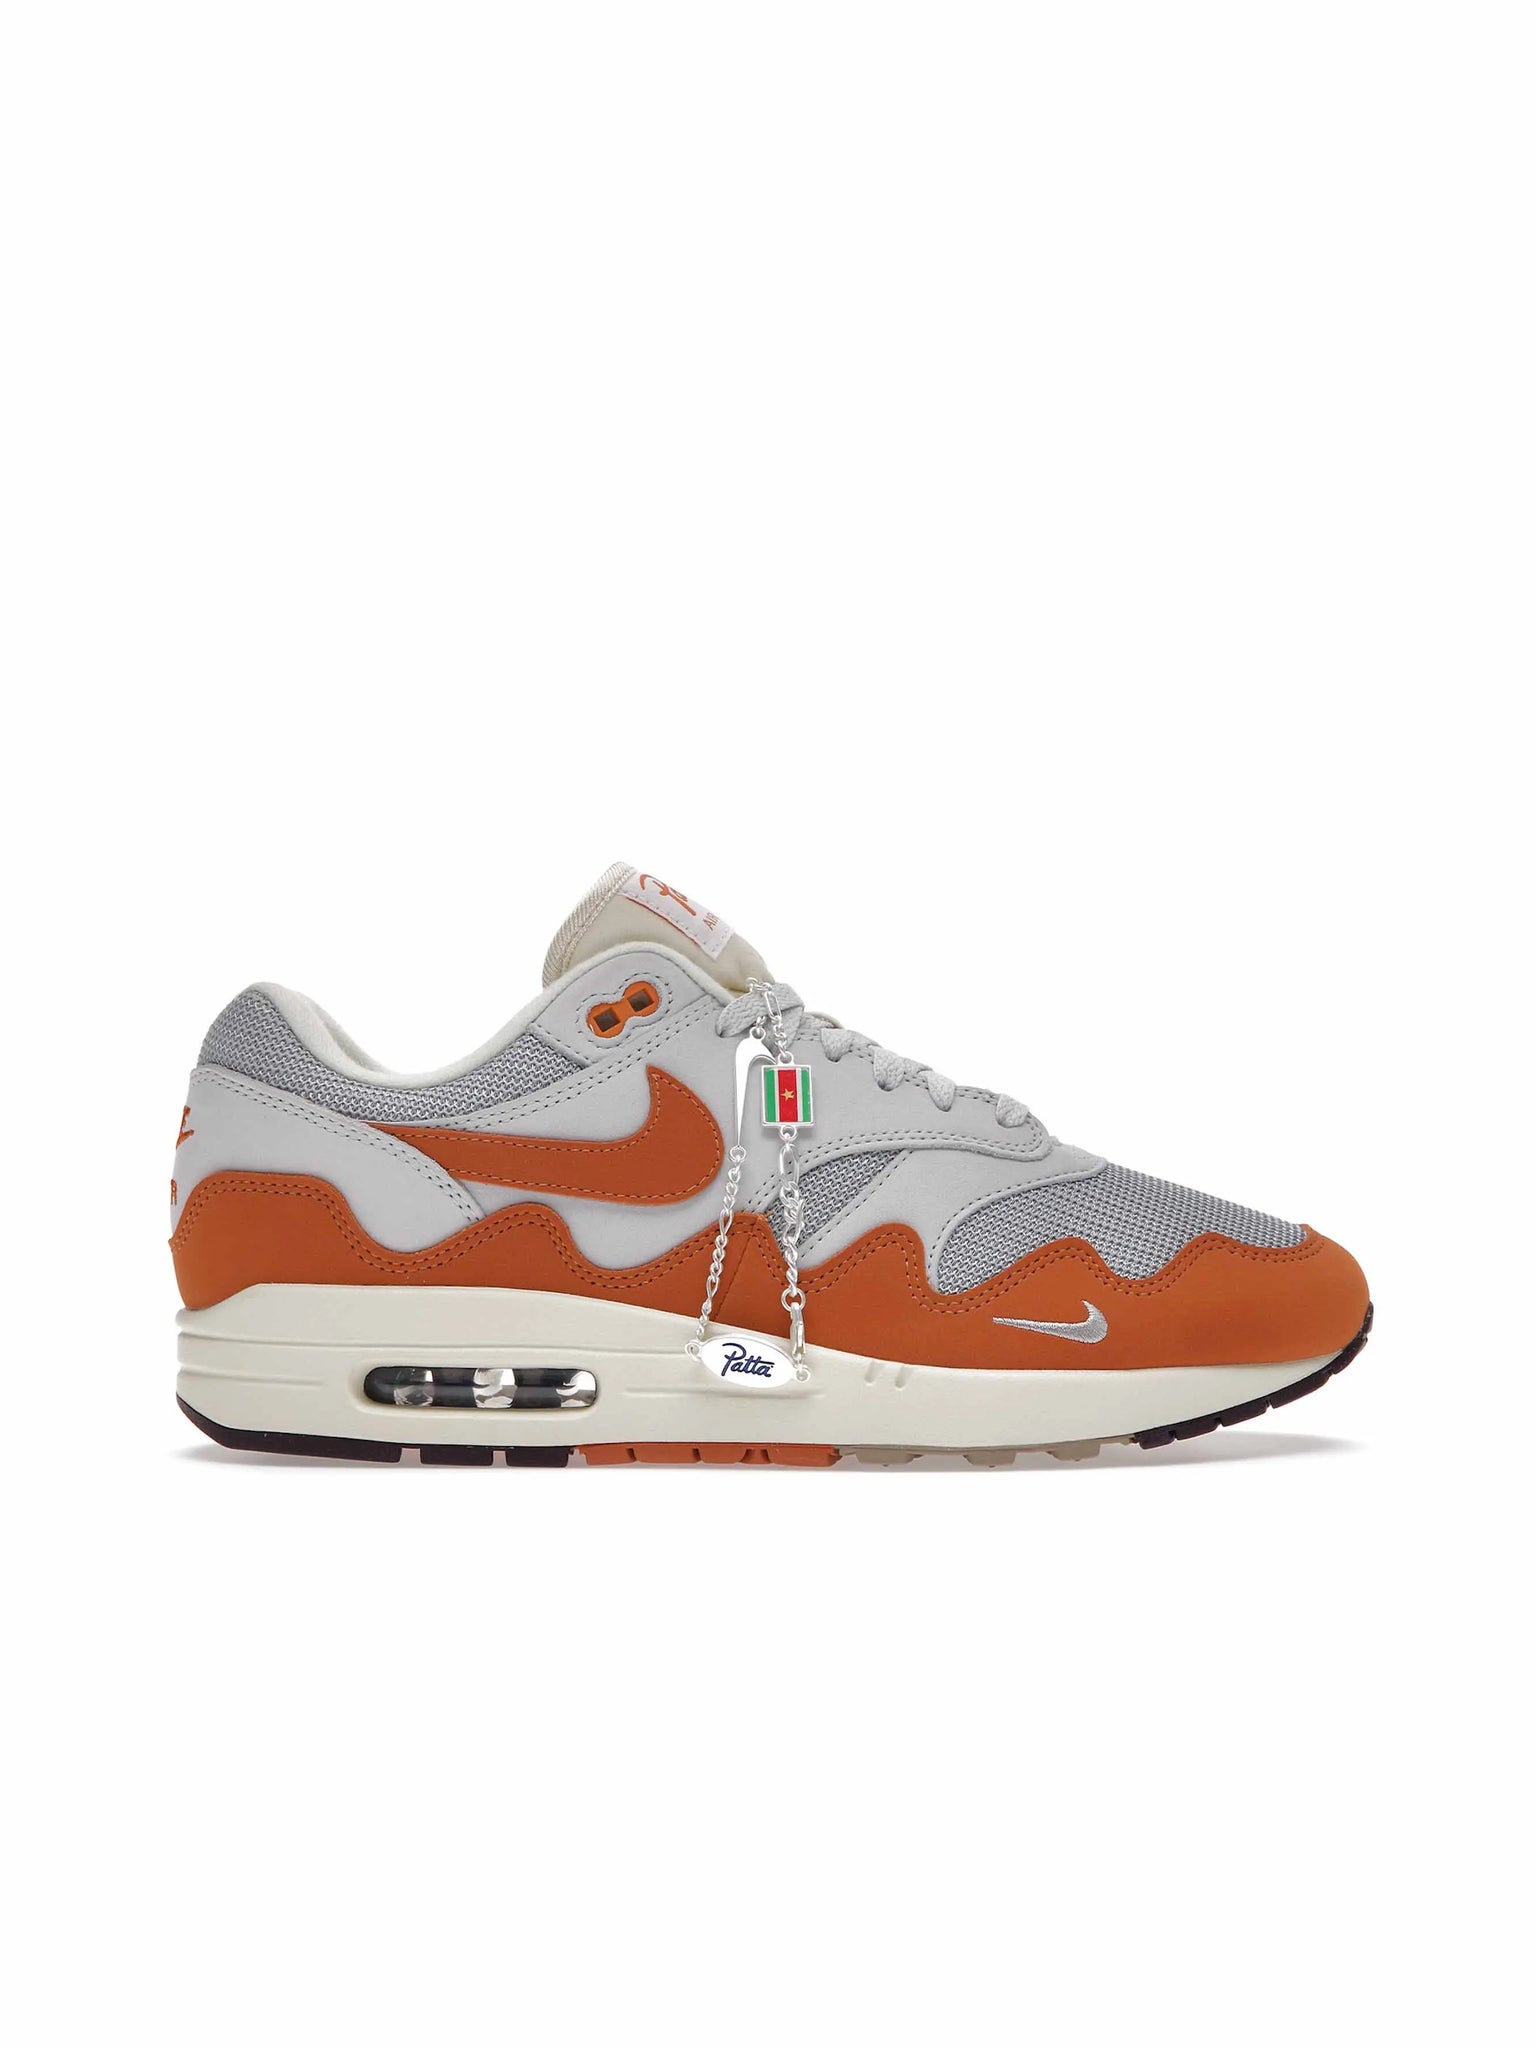 Nike Air Max 1 Patta Waves Monarch (with Bracelet) - Prior